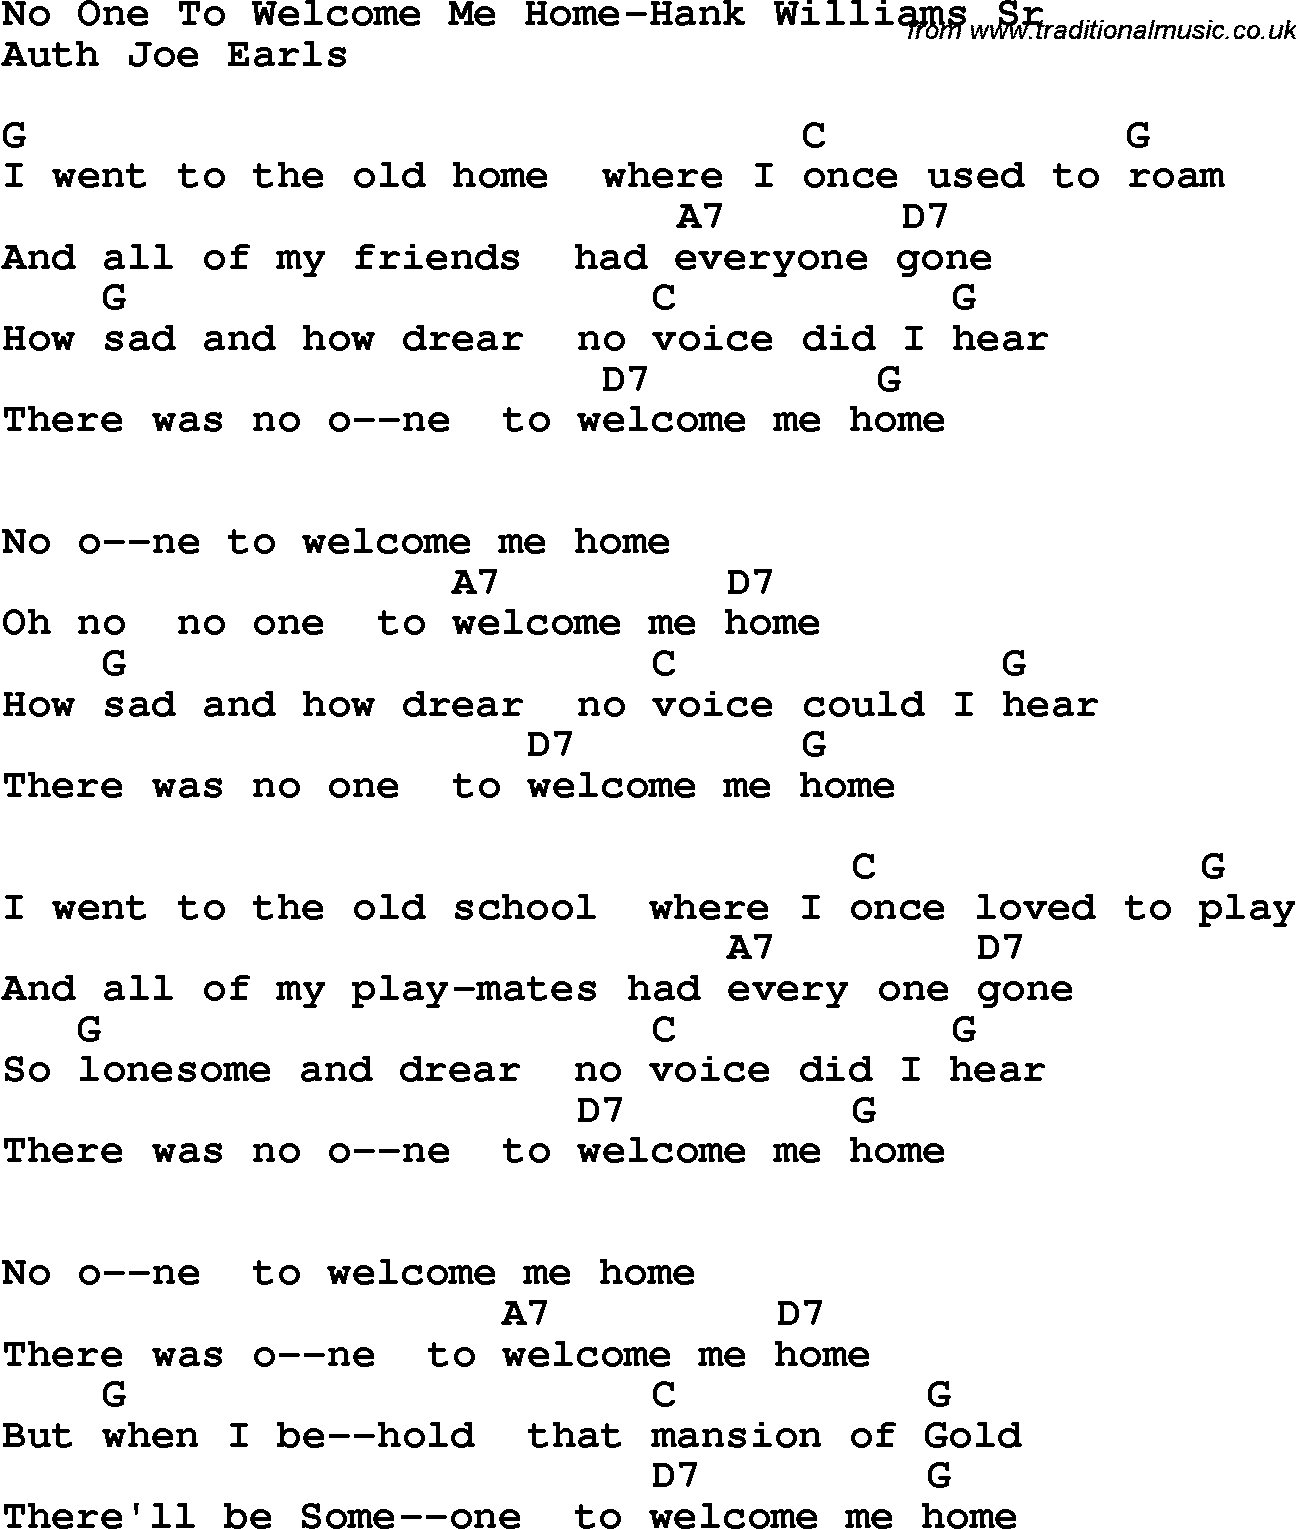 Country, Southern and Bluegrass Gospel Song No One To Welcome Me Home-Hank Williams Sr lyrics and chords